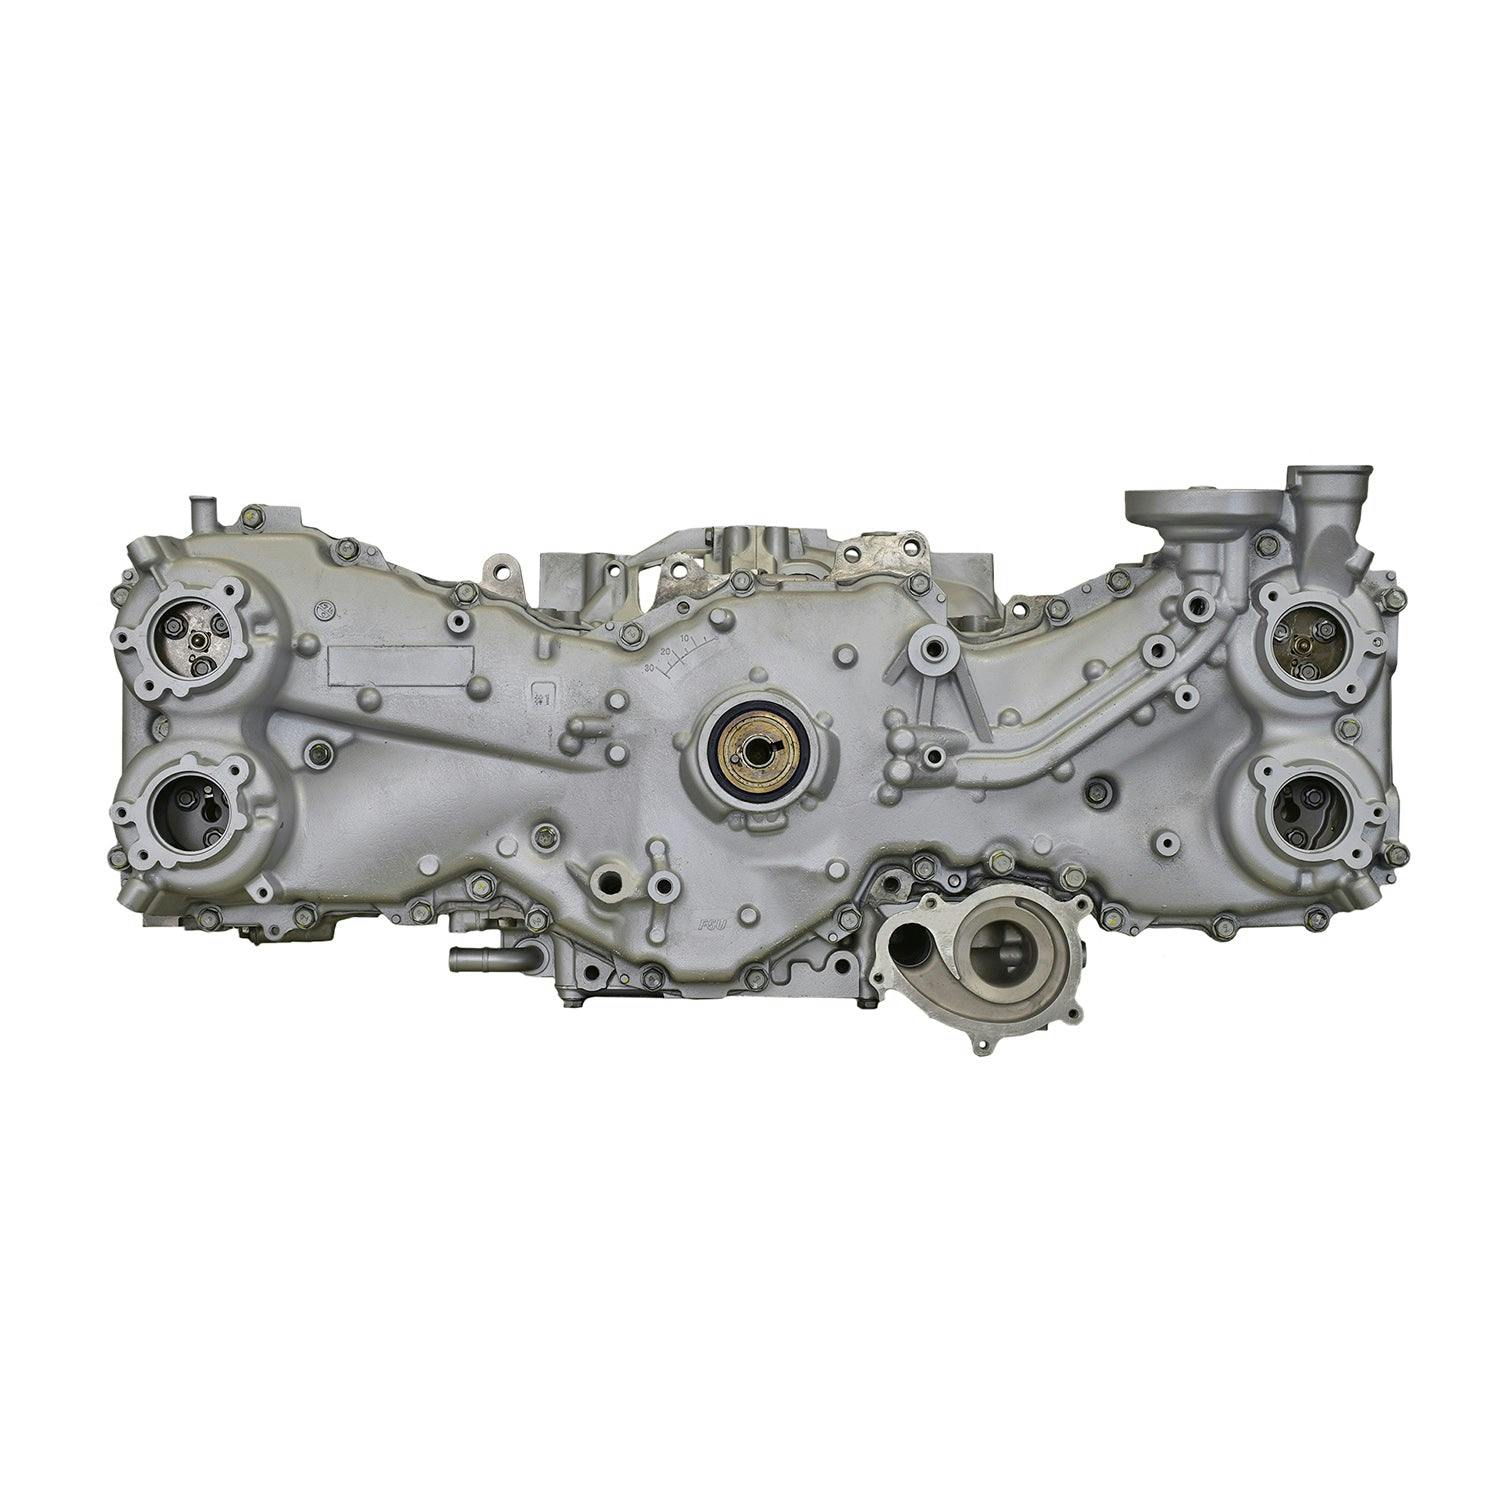 2.5L Flat-4 Engine for 2011-2013 Subaru Forester